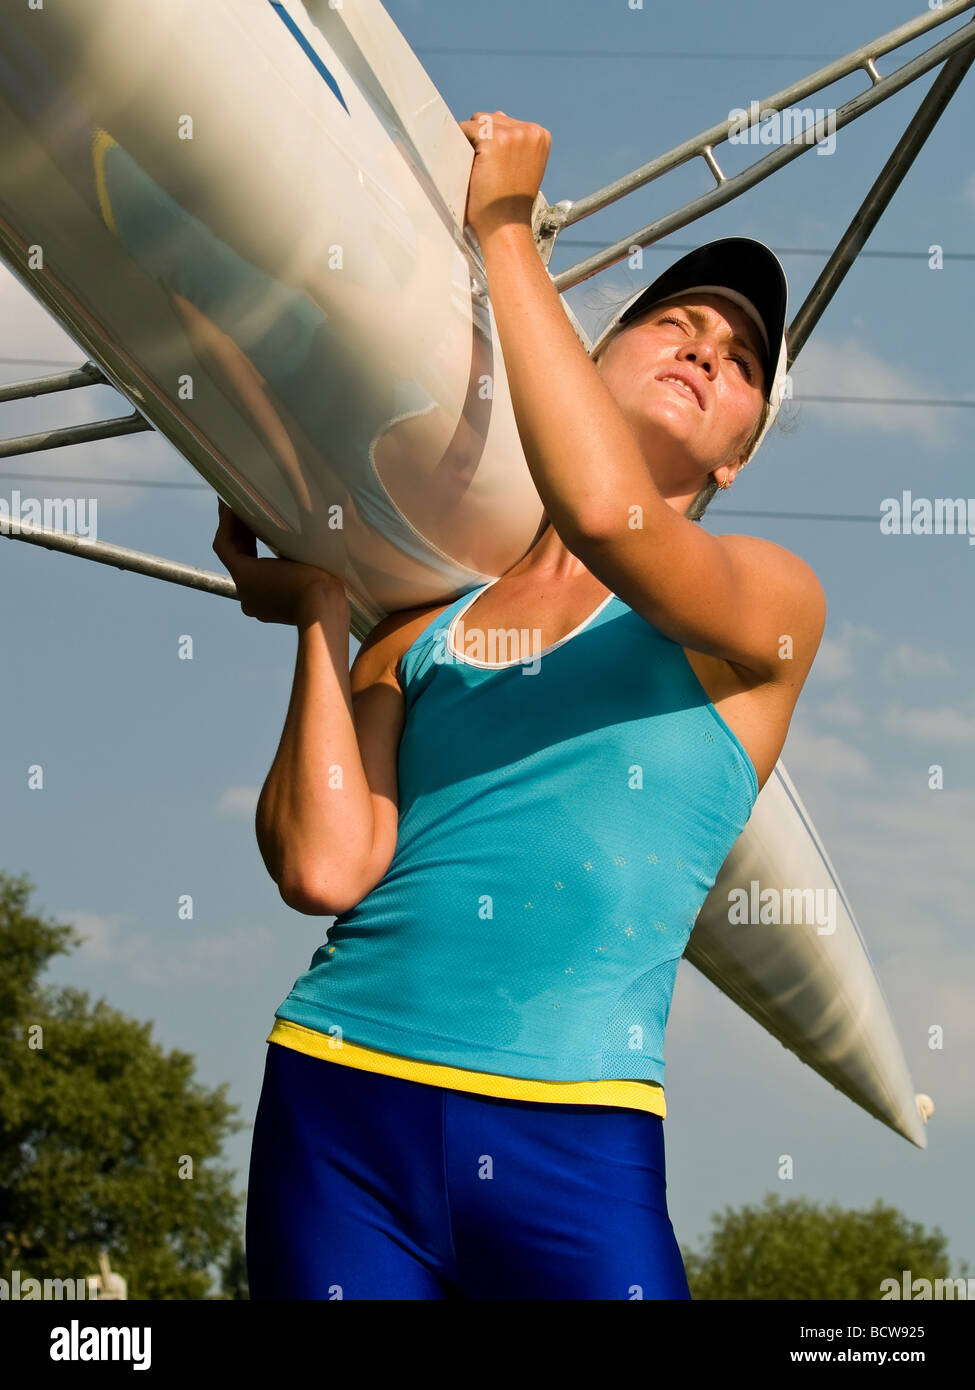 Rower girl carrying sport boat outdoors summer Stock Photo